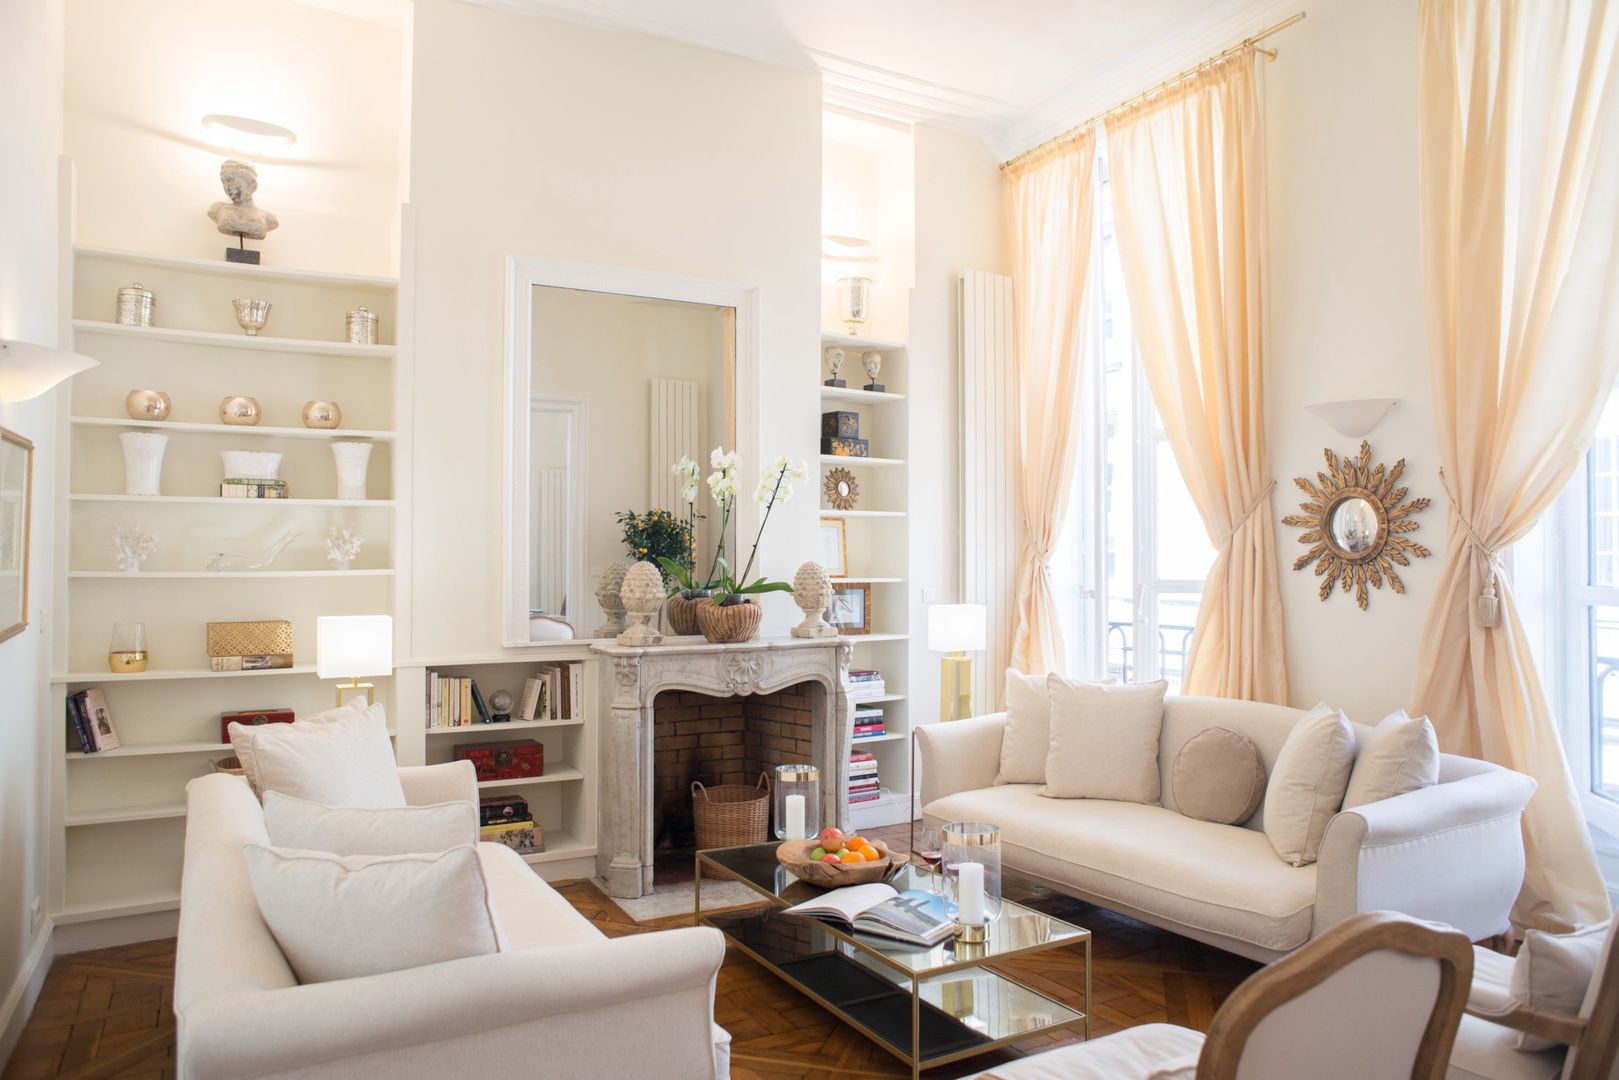 Welcome to the elegant and comfortable Clos Jolie apartment!